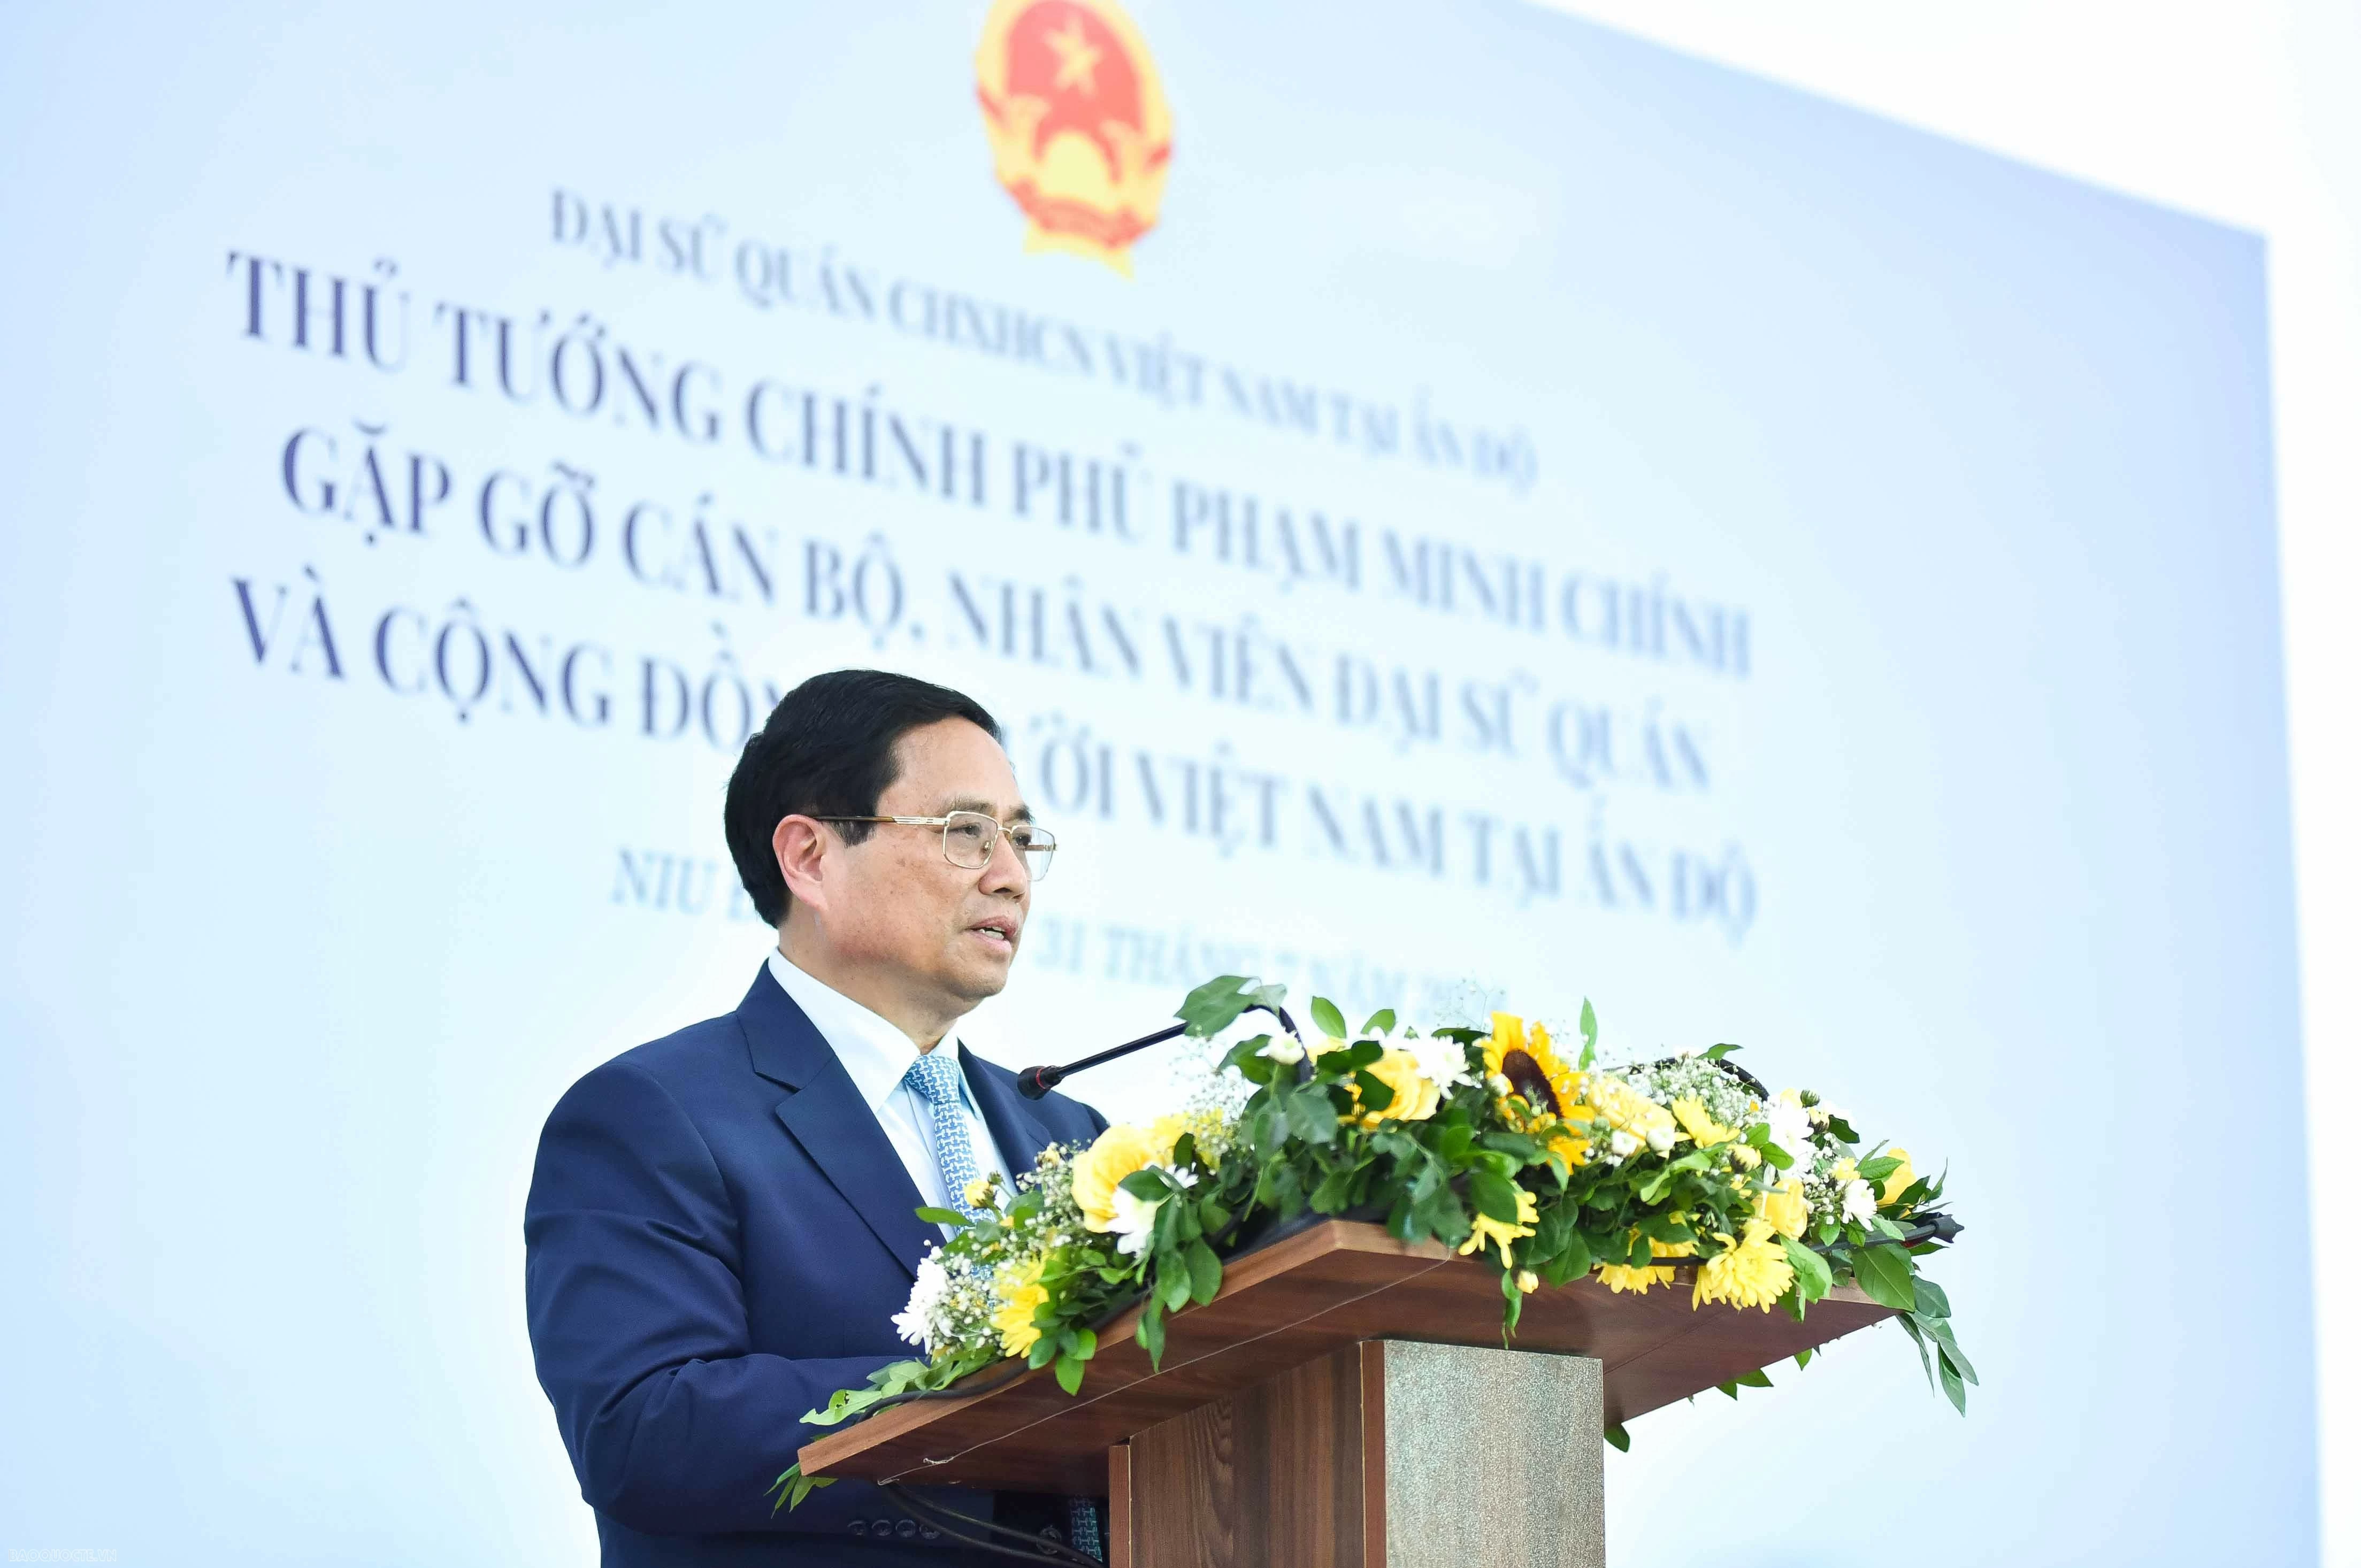 PM Pham Minh Chinh pays tribute to President Ho Chi Minh in New Delhi